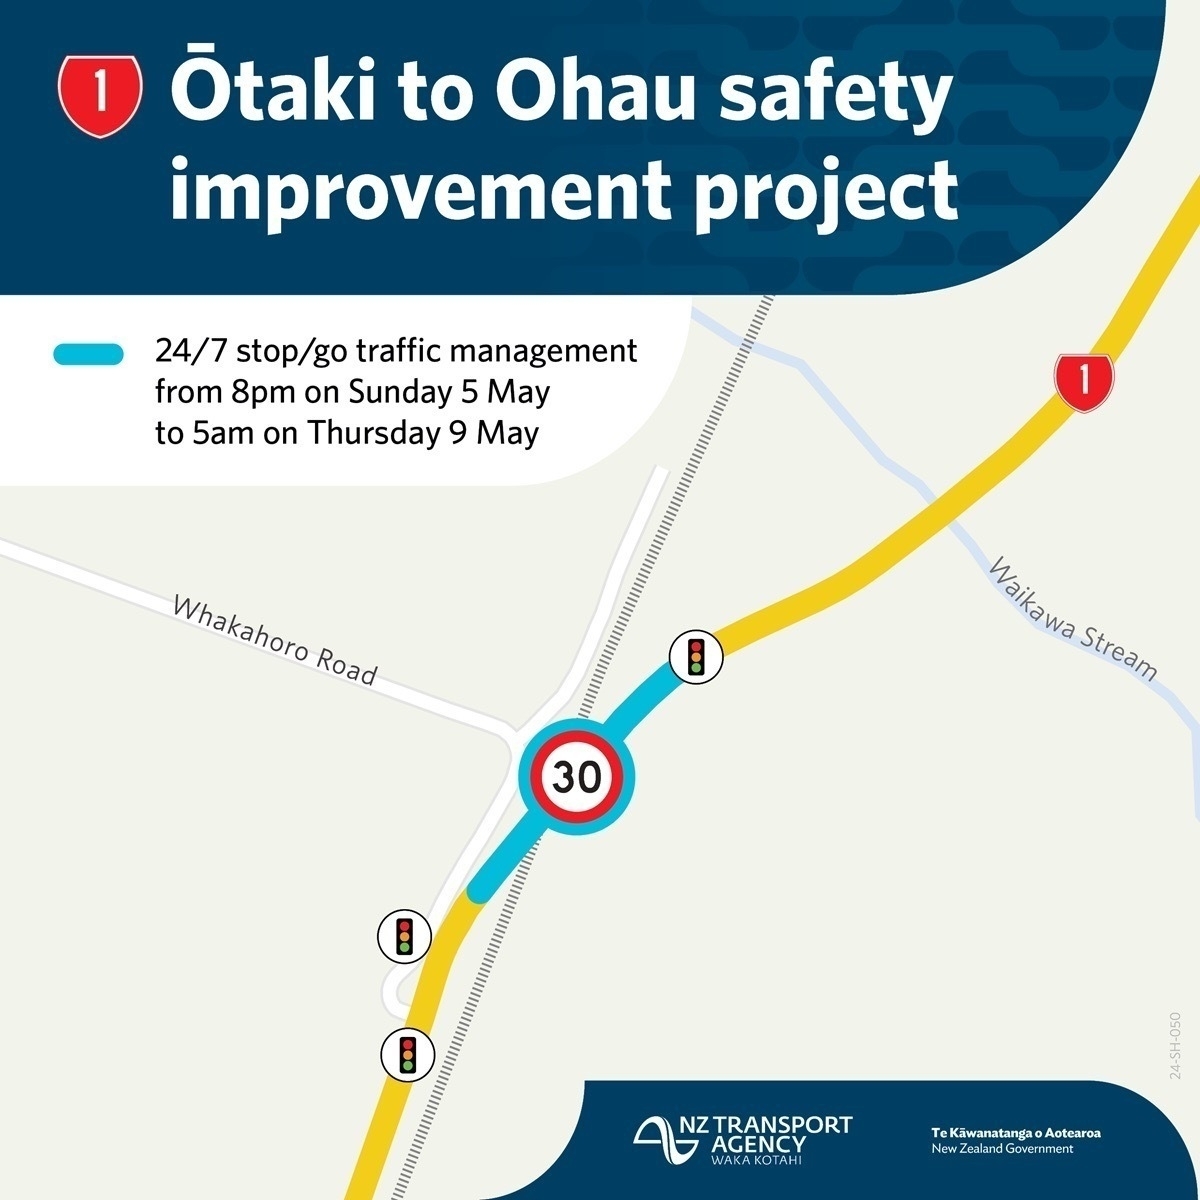 Stop/go traffic management in place at Manakau Rail Overbridge from Sunday 5 May.